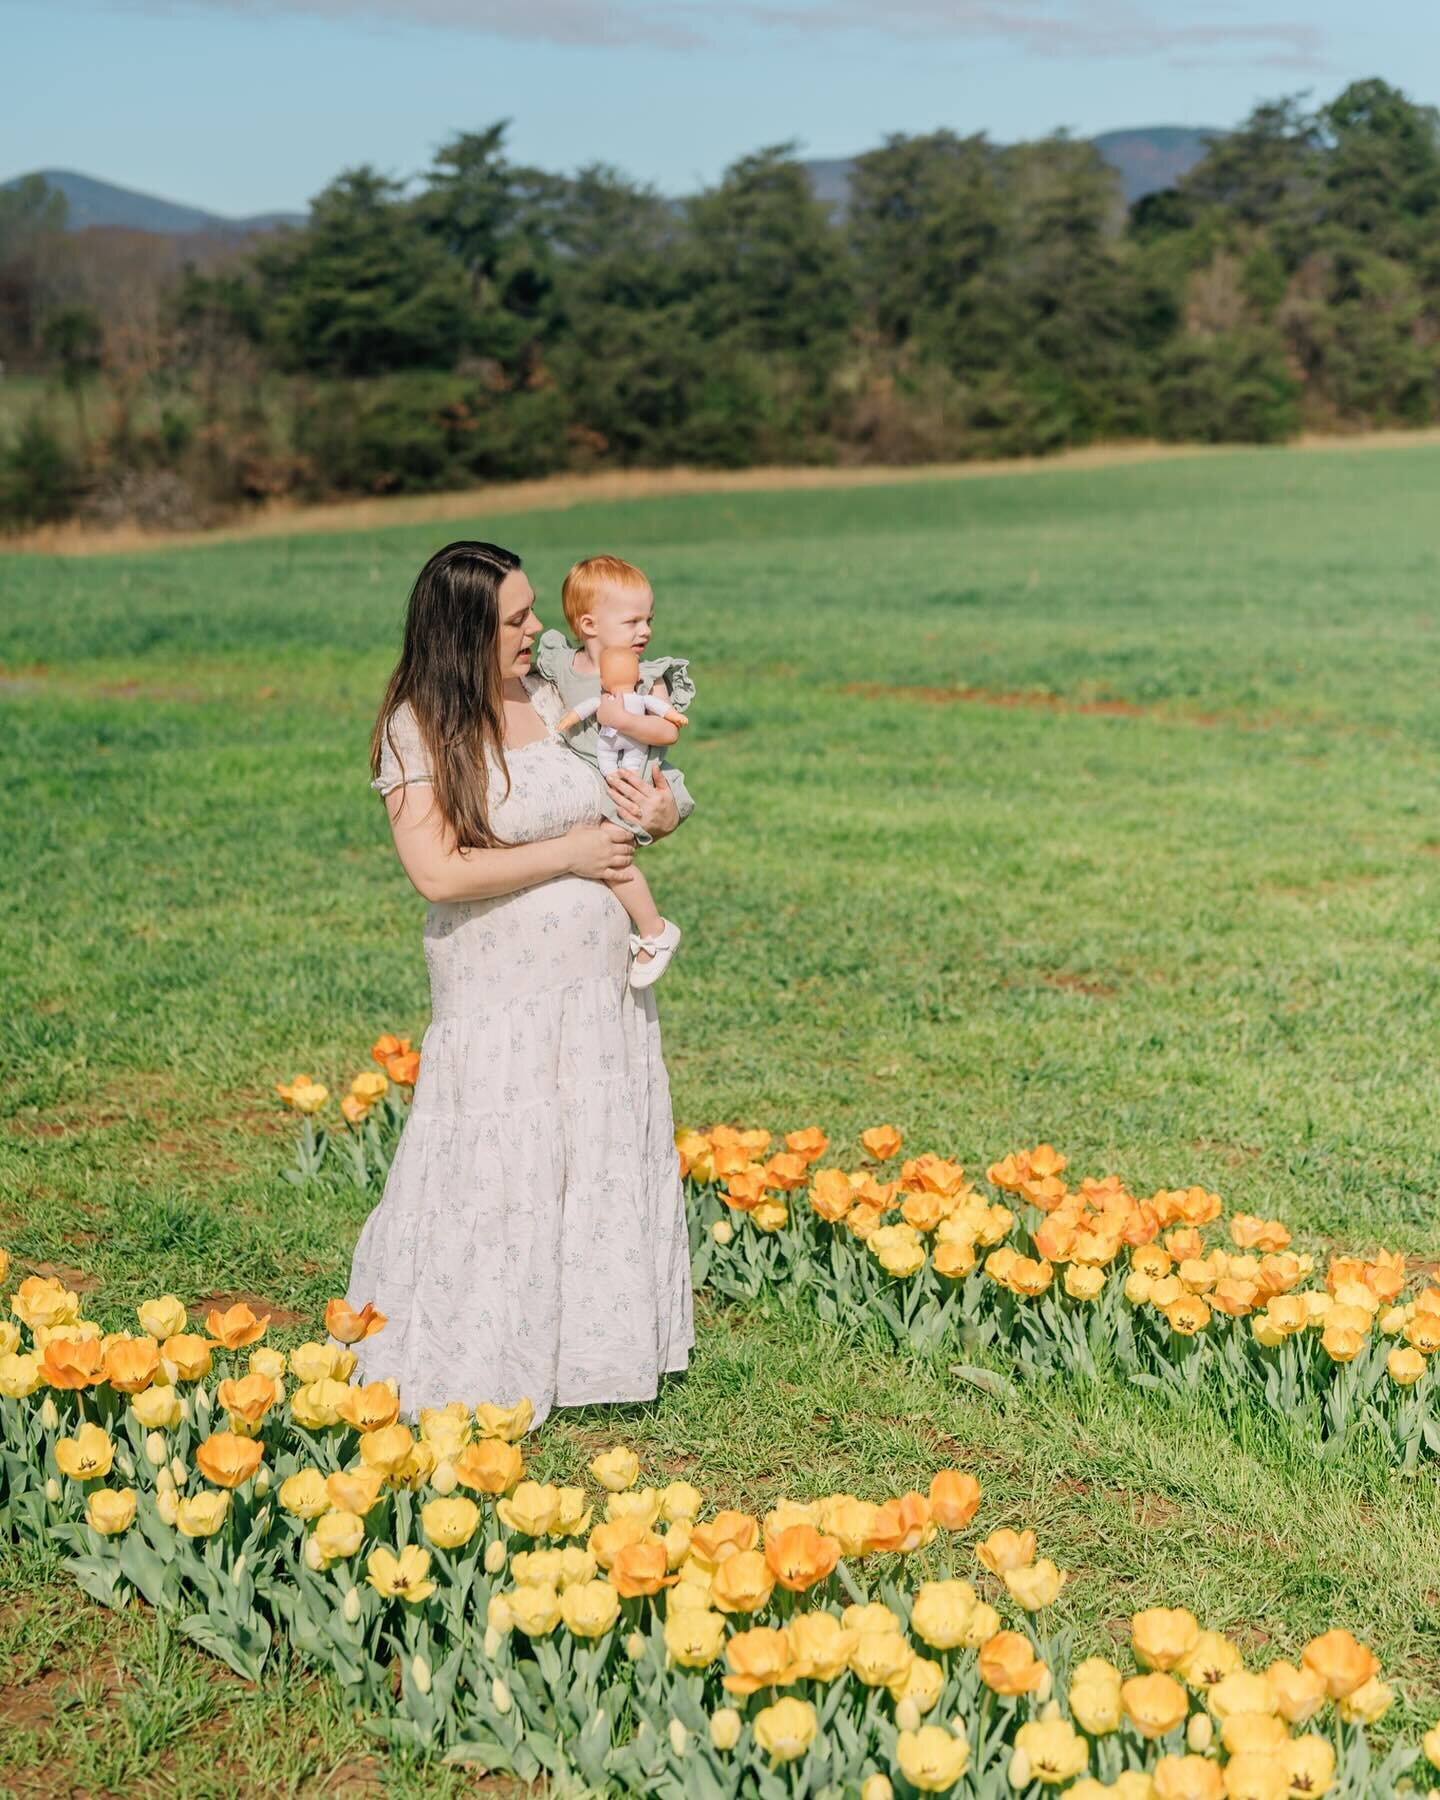 Spring is here! It was so much fun getting to pick gorgeous tulips and taking some photos of myself with my own little one! This pregnancy has been flying by, and I can&rsquo;t believe we will meet our newest little in three months or less!

P.s. the